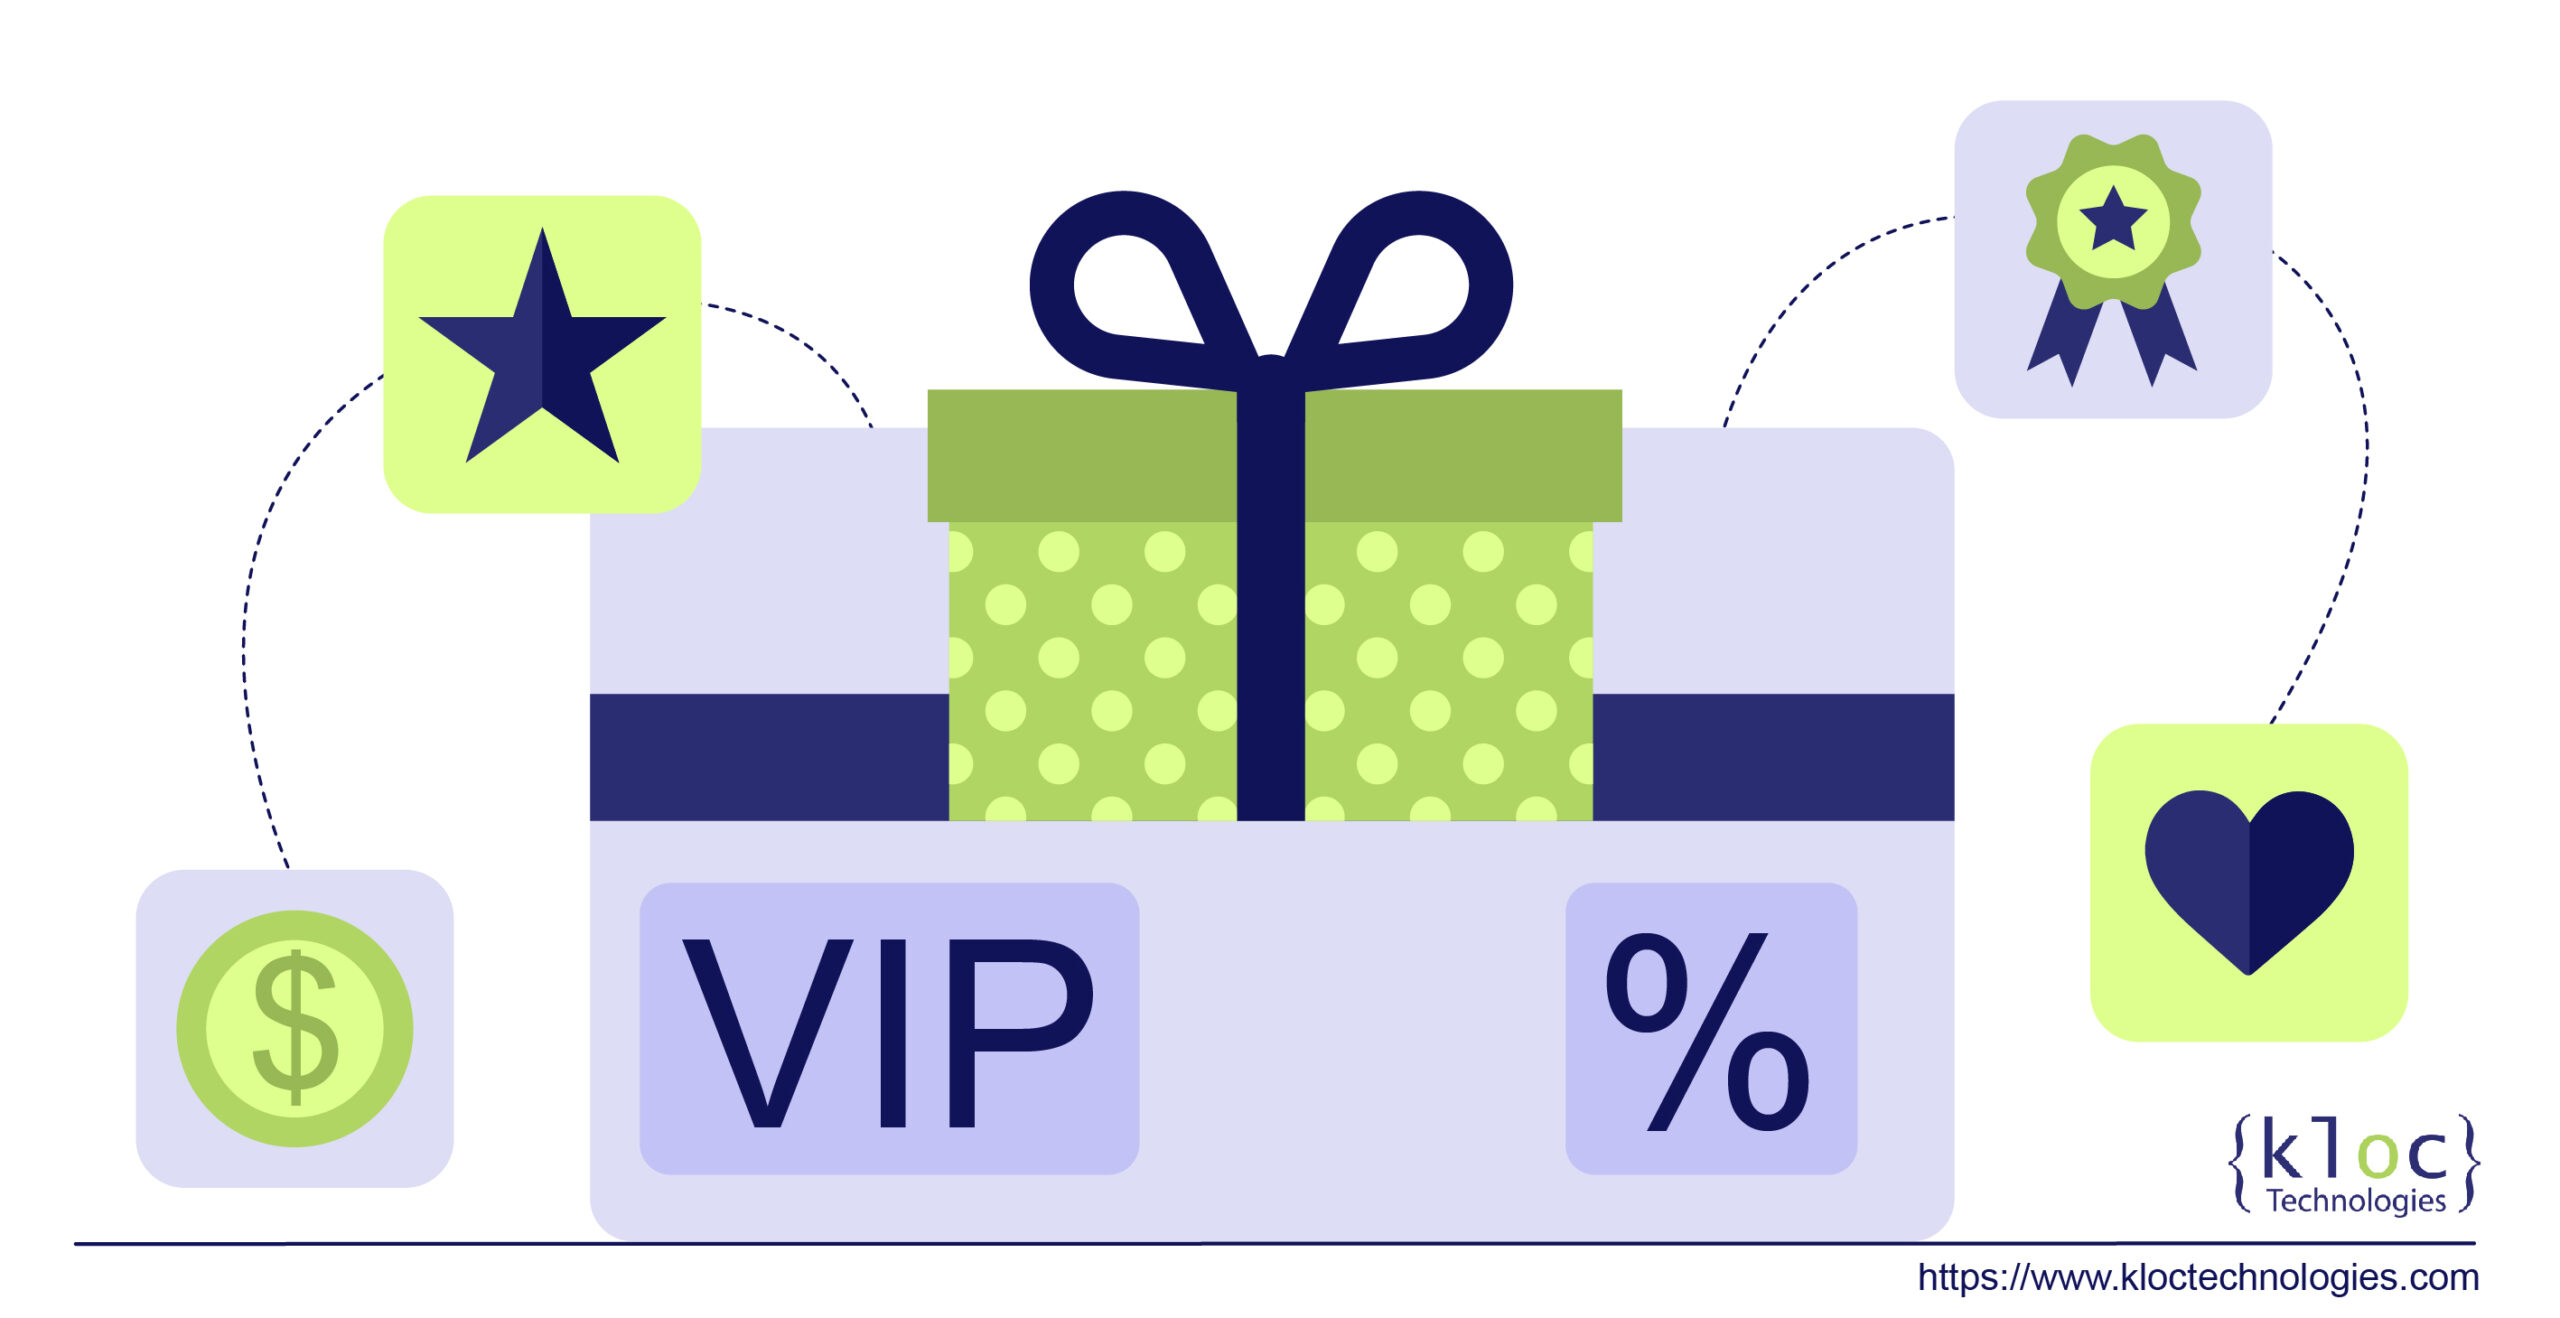 How to leverage ECommerce for Christmas shopping